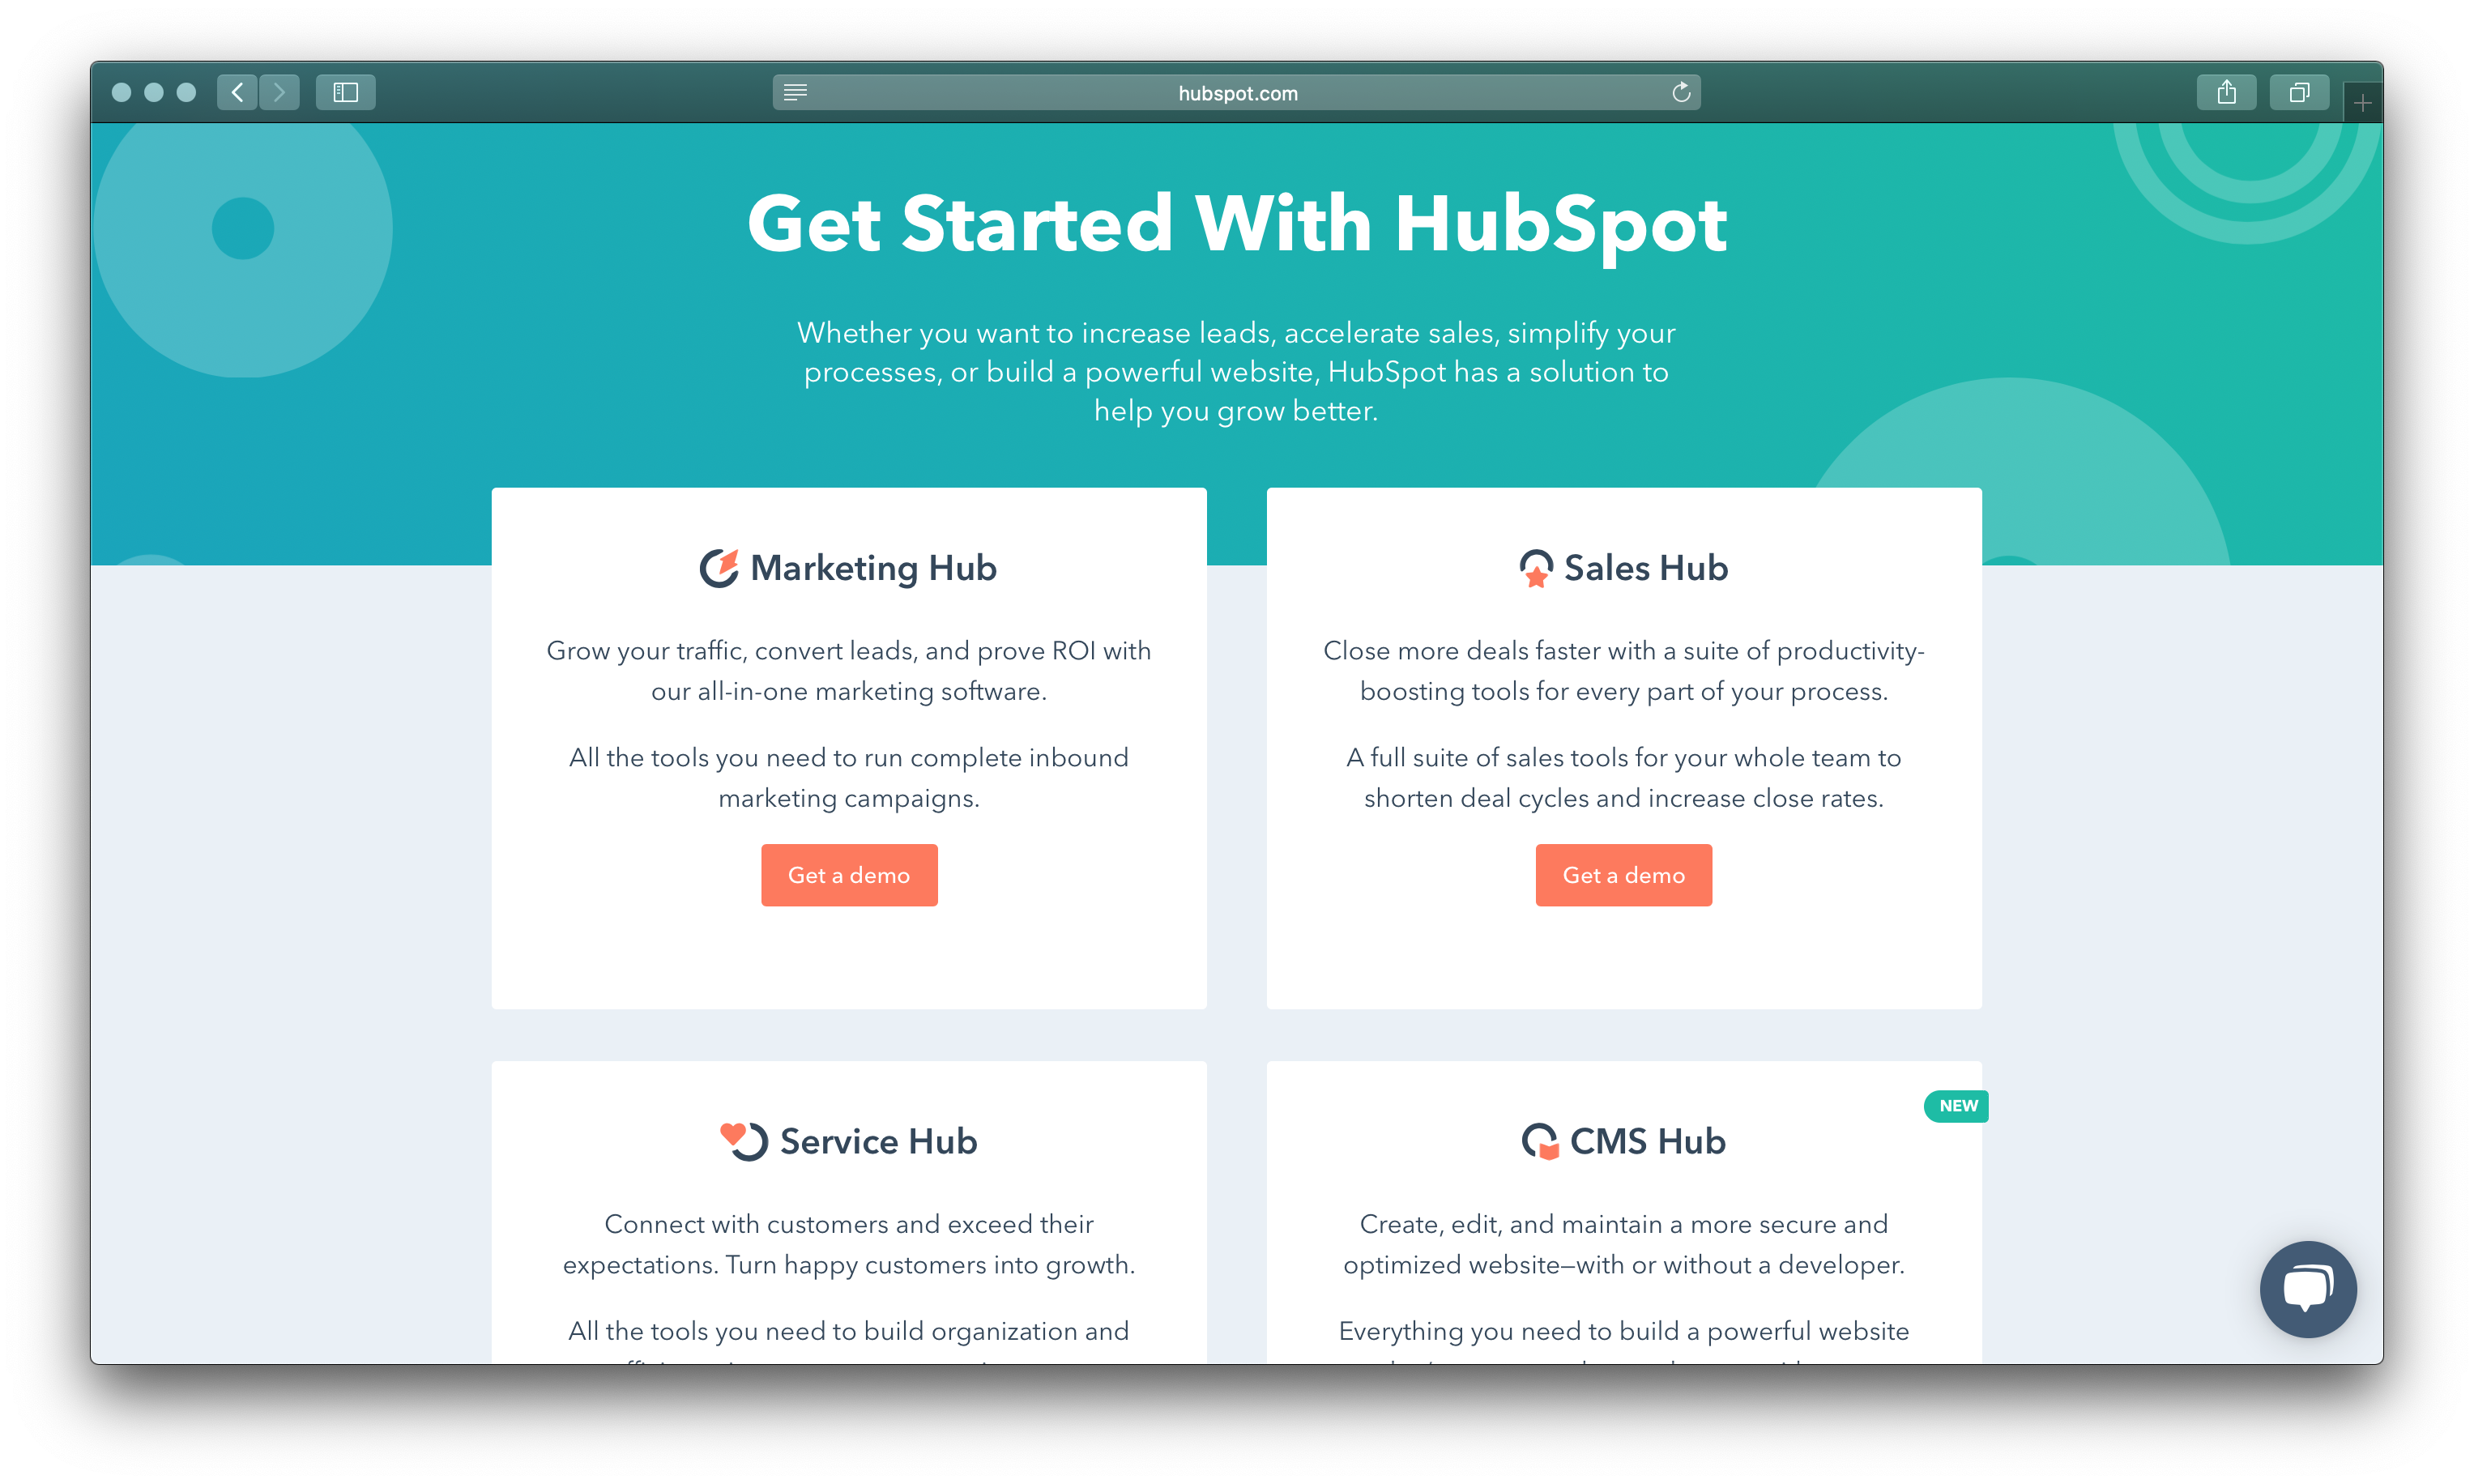 Getting Started | Choosing the right HubSpot package for your business